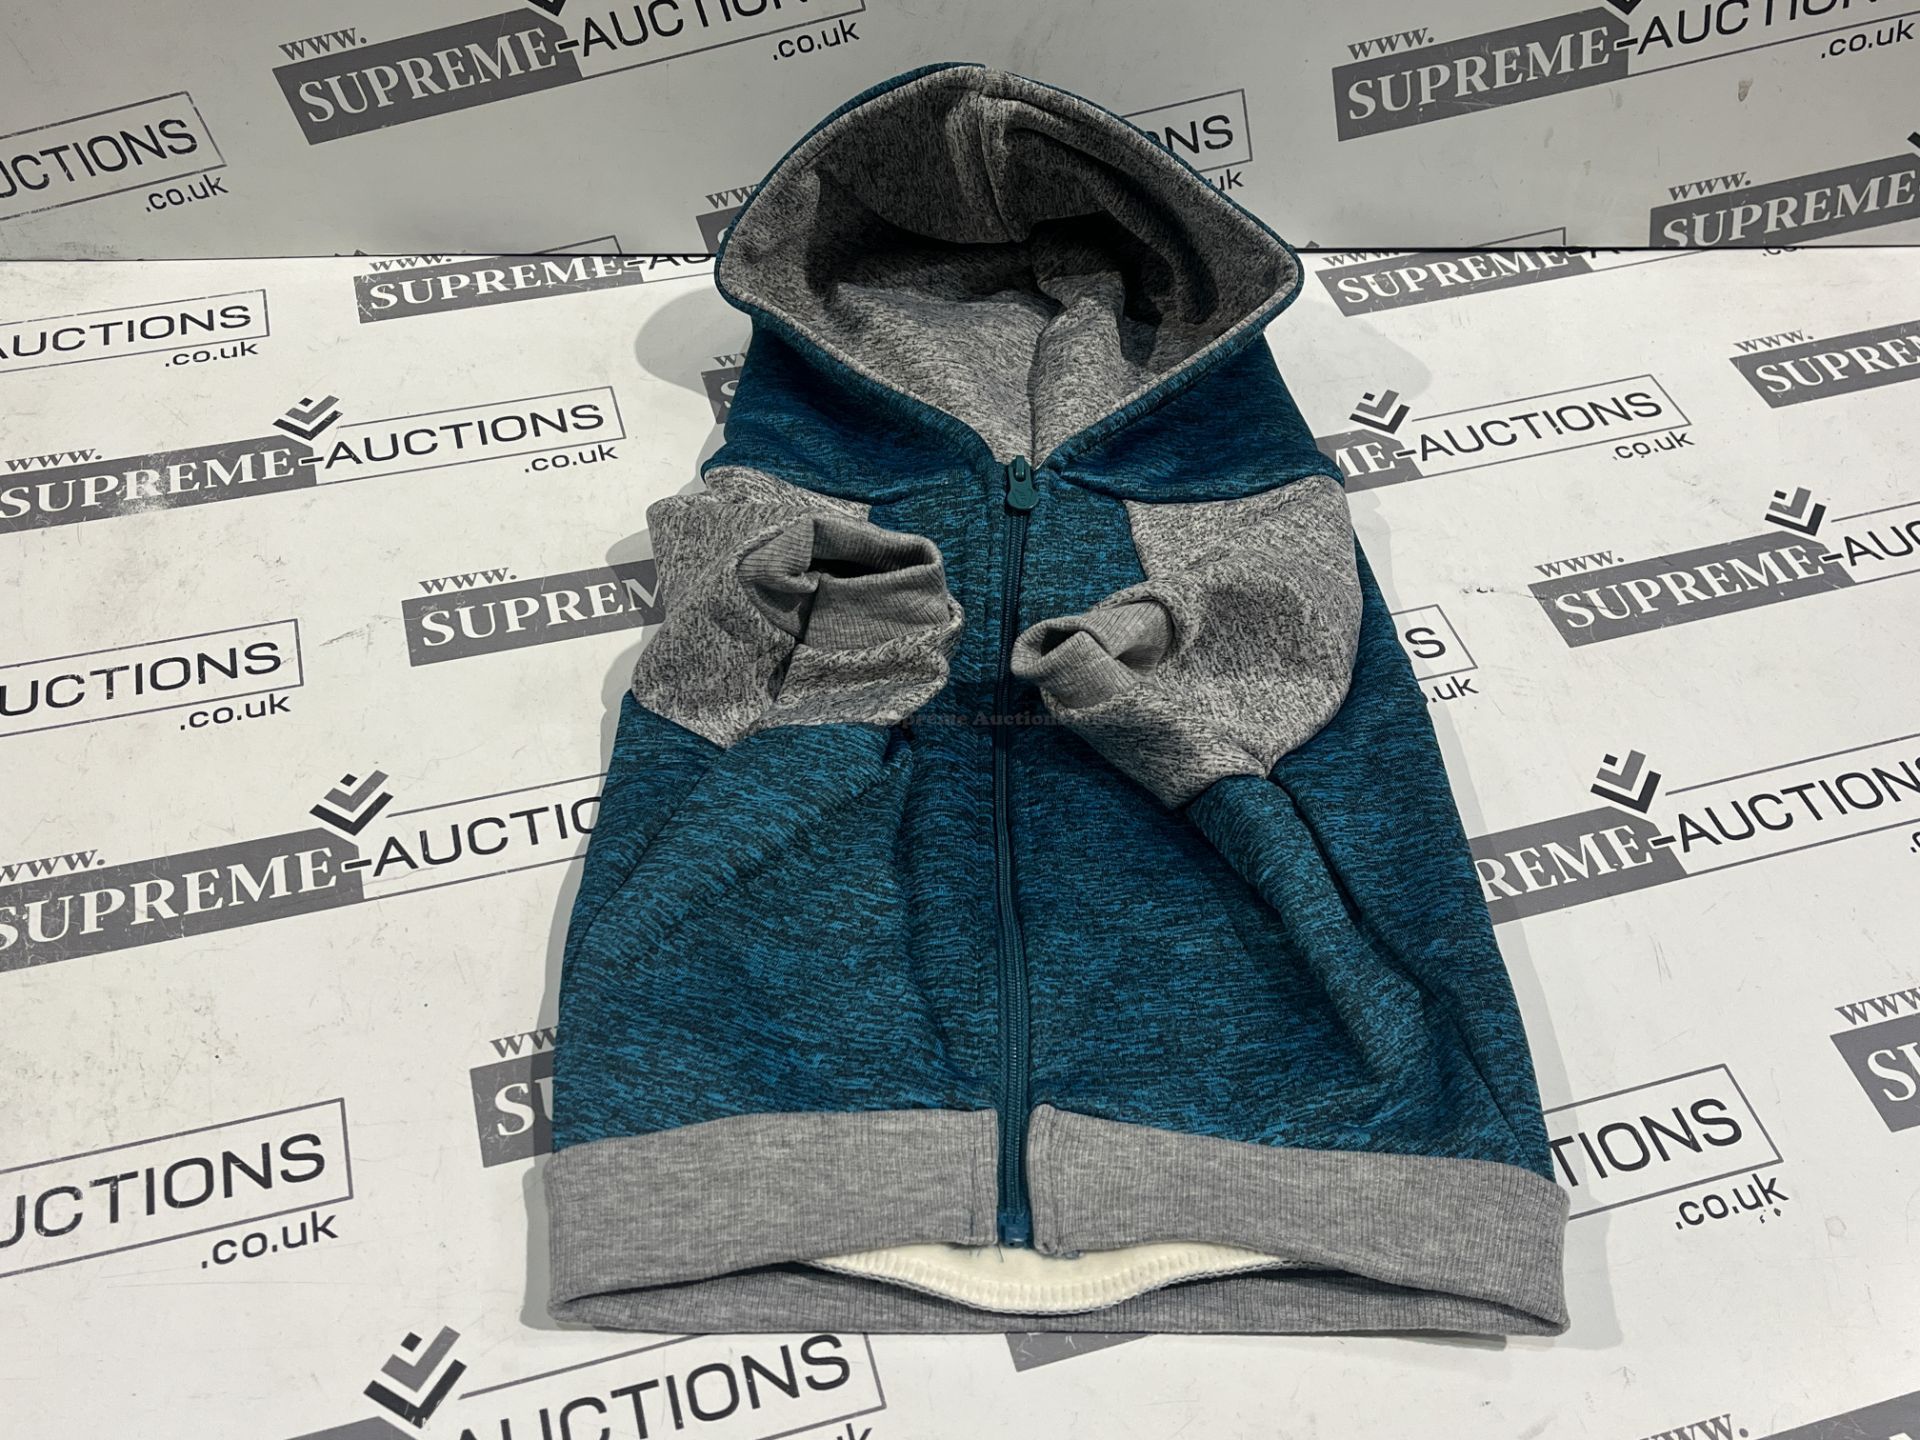 18 X BRAND NEW FRENCHIE BULLDOG PREMIUM BLUE AND GREY DOG HOODIES SIZE LARGE RRP £43 EACH R6-8